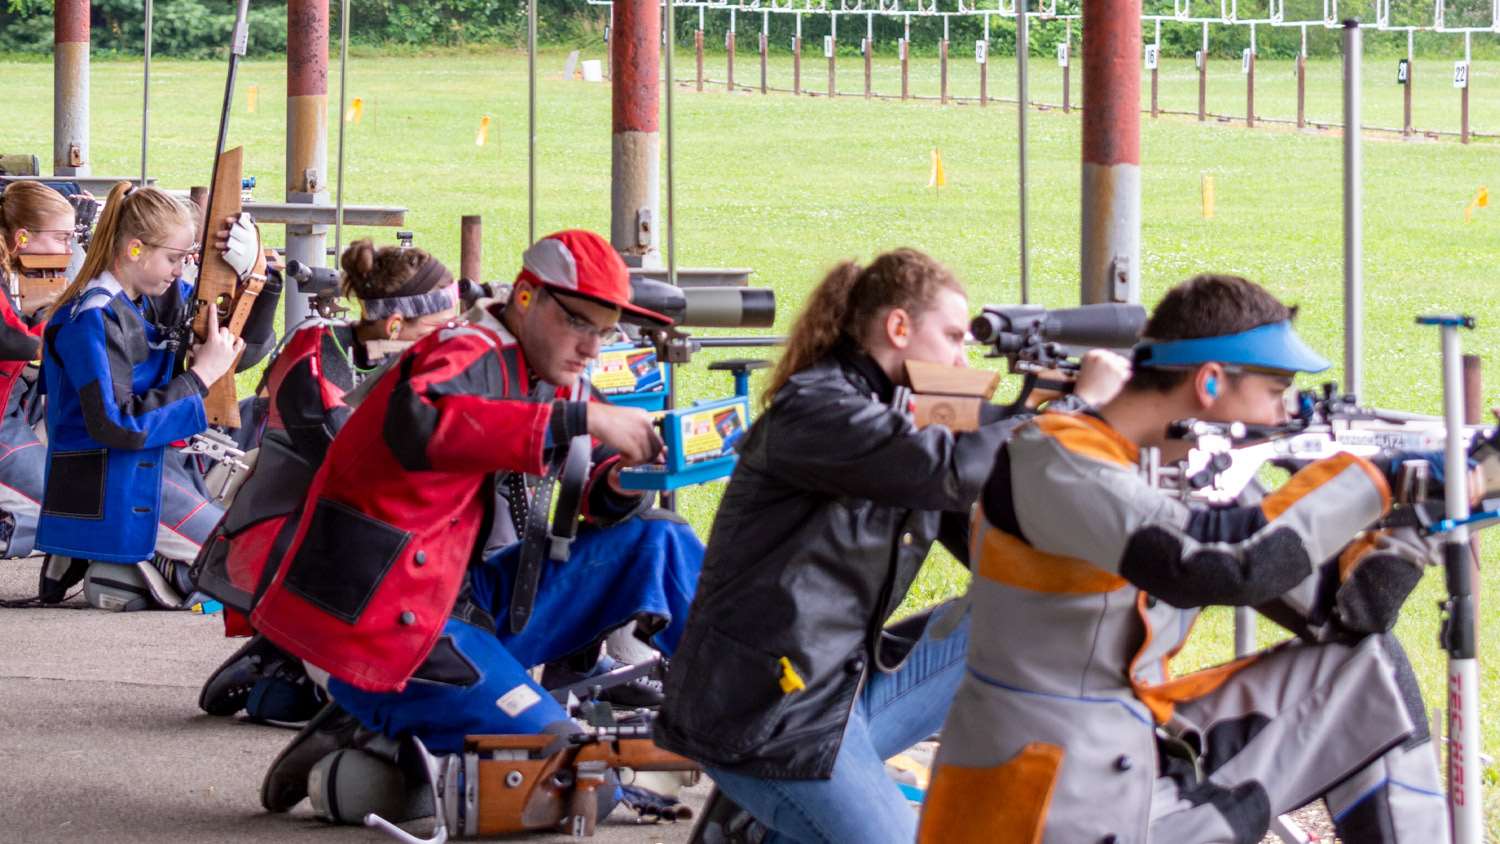 Smallbore rifle shooting in the kneeling position